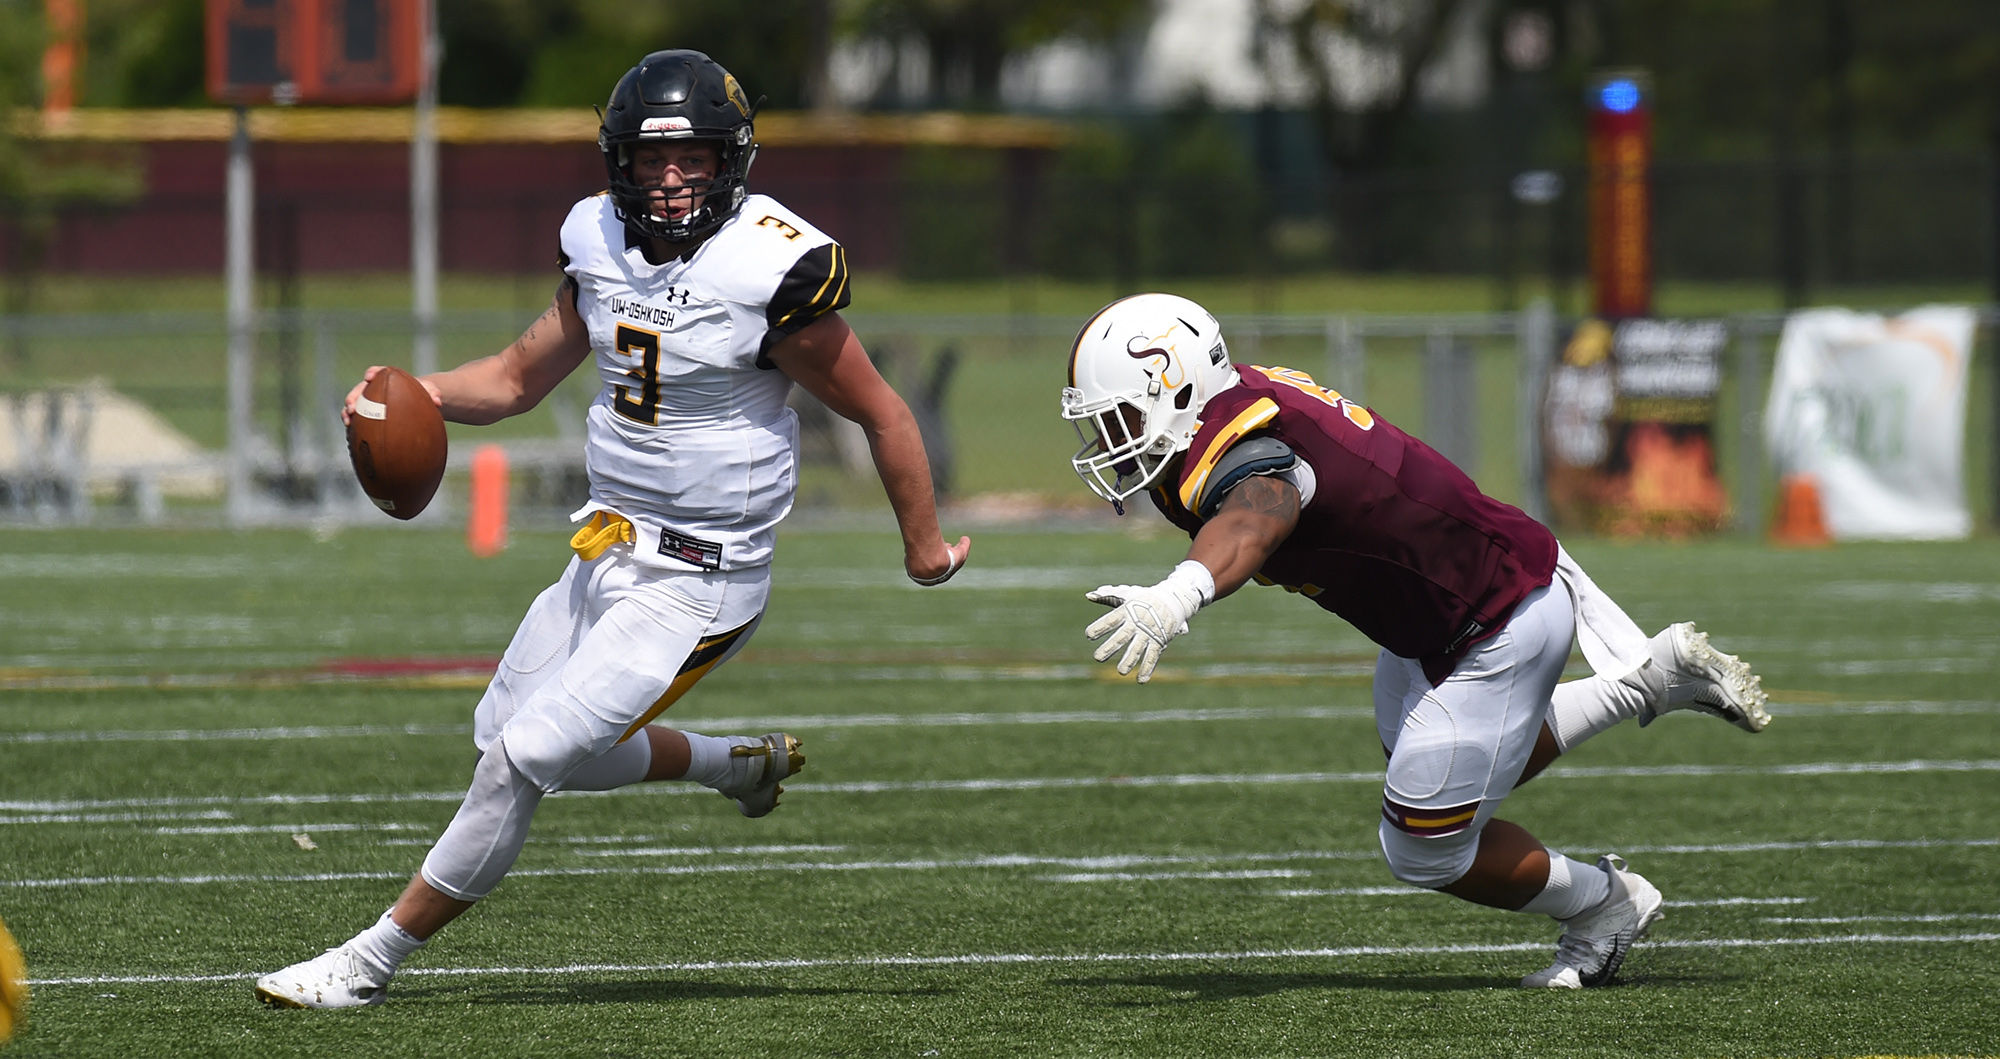 Kobe Berghammer completed 8 of 17 passes for 197 yards and two touchdowns in the fourth quarter of UW-Oshkosh's game with Salisbury University.